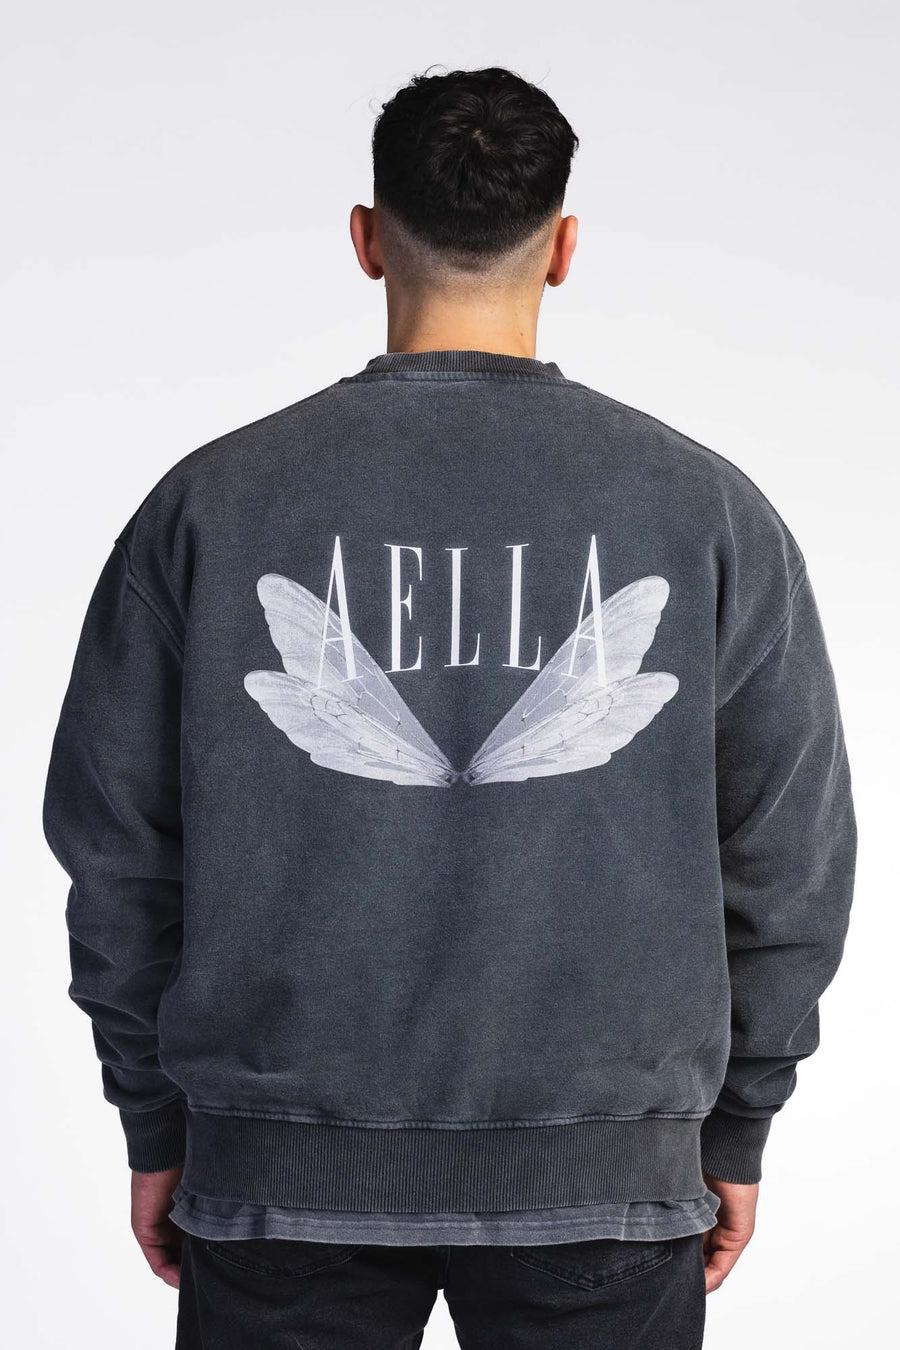 The Wings Crew Neck Sweater